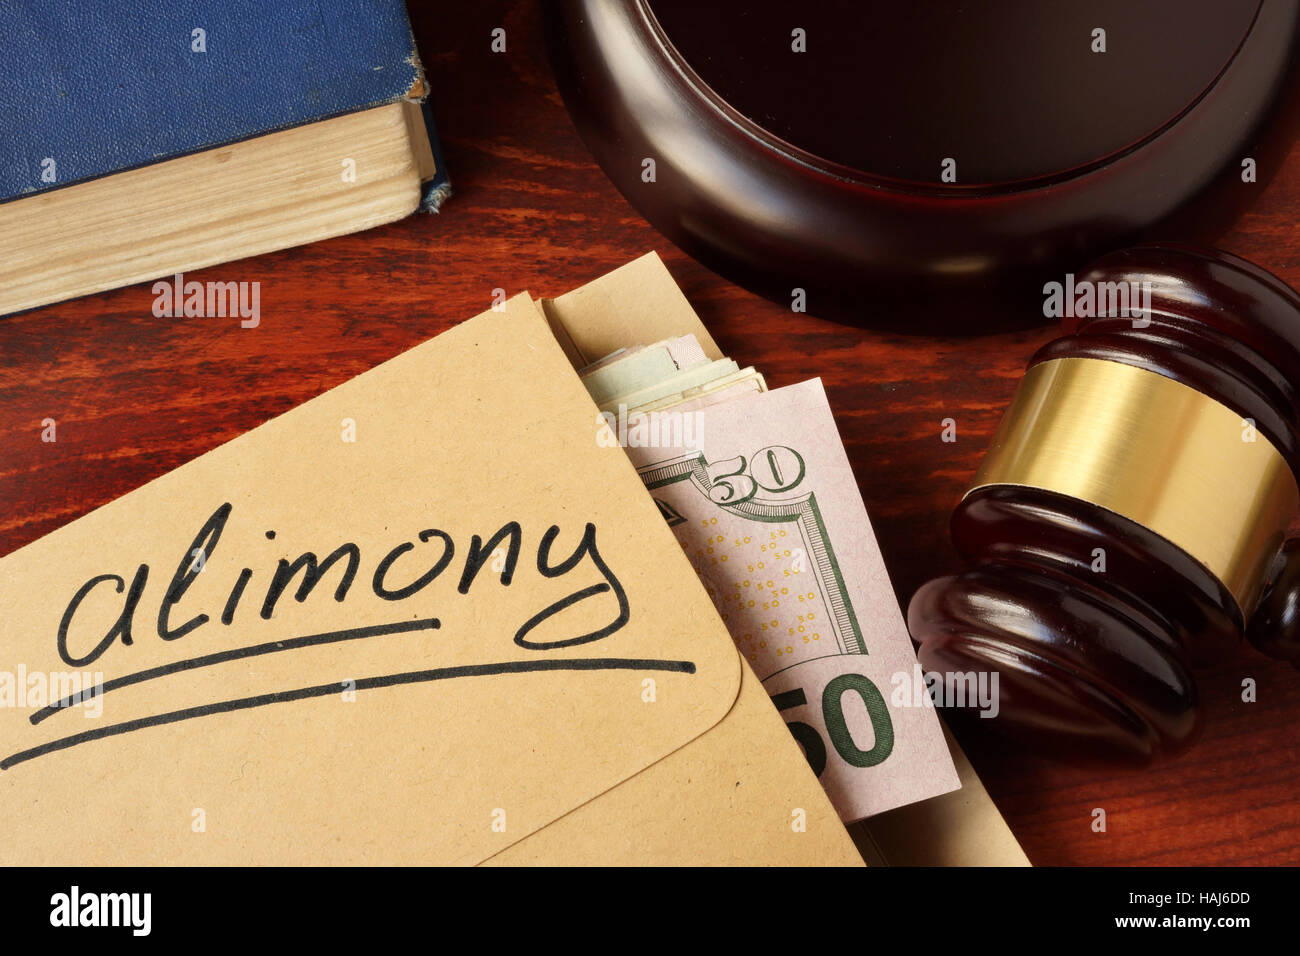 Alimony concept. An envelope with cash on a table. Stock Photo